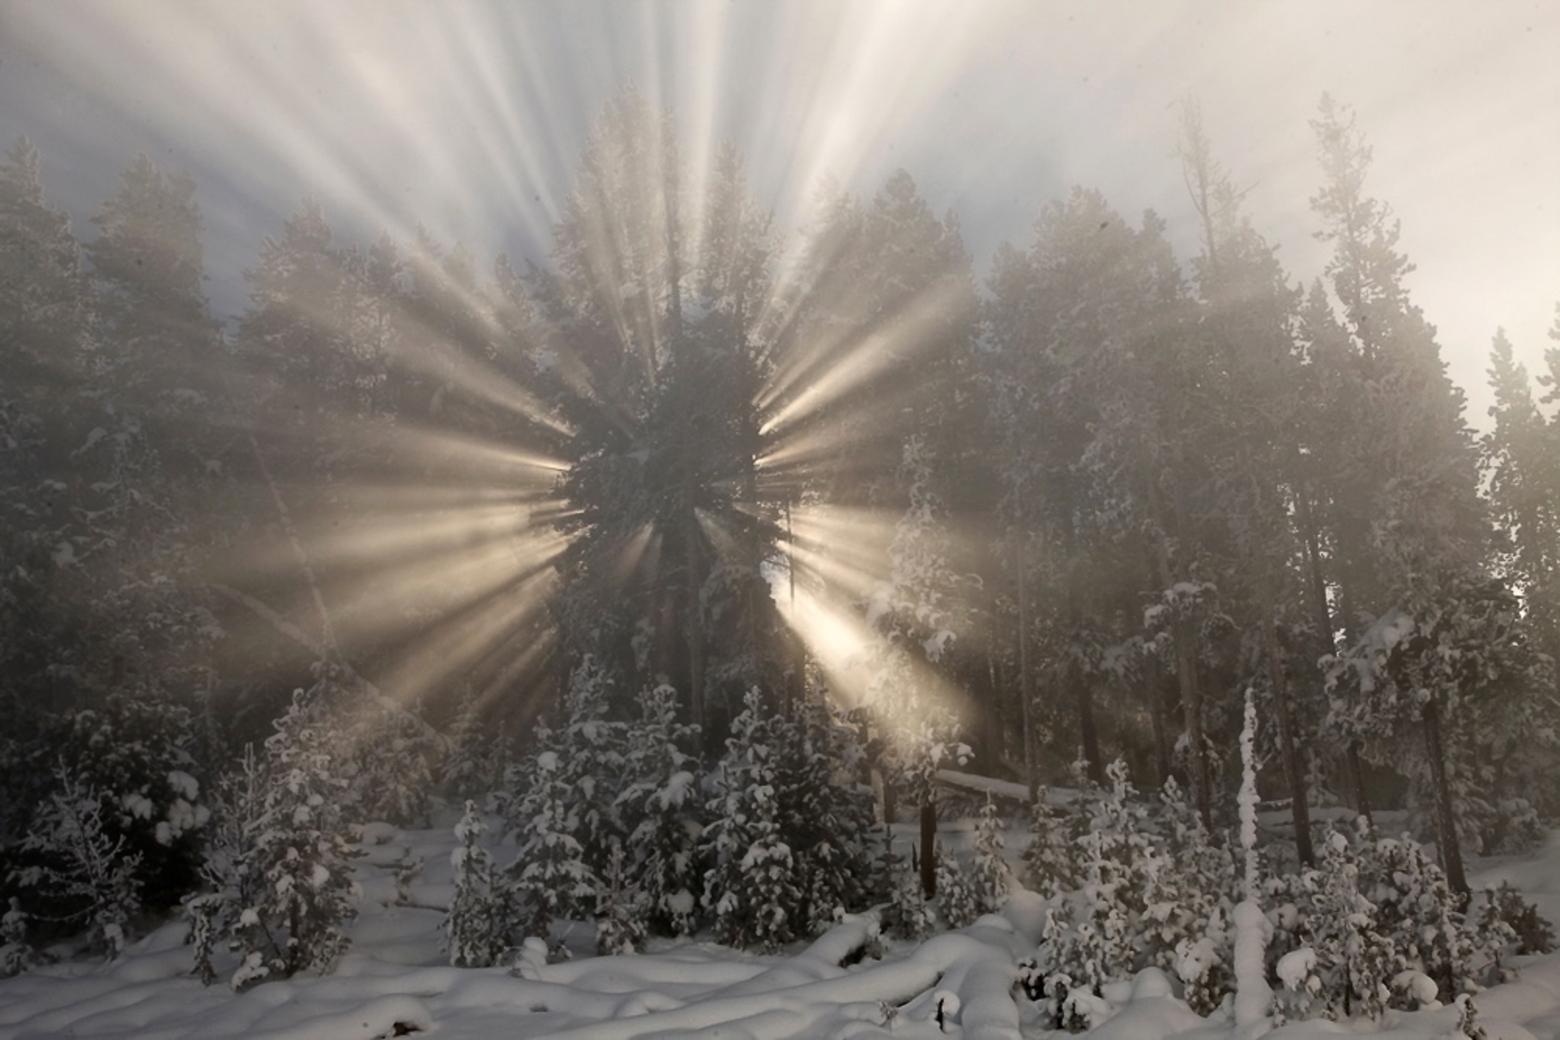 Of this image, titled “Crepuscular”, Fuller observes, “As the sun rises crepuscular rays stream out of the light and shadows created as ‘steam’ from nearly hot springs drifts through nearby trees.  The rays radiate like the spokes of a wheel spreading from the hub of the sun at the center. Crepuscular refers to twilight, that magical transformation of day to night, of light to dark, and of night to day, of dark to light.” 